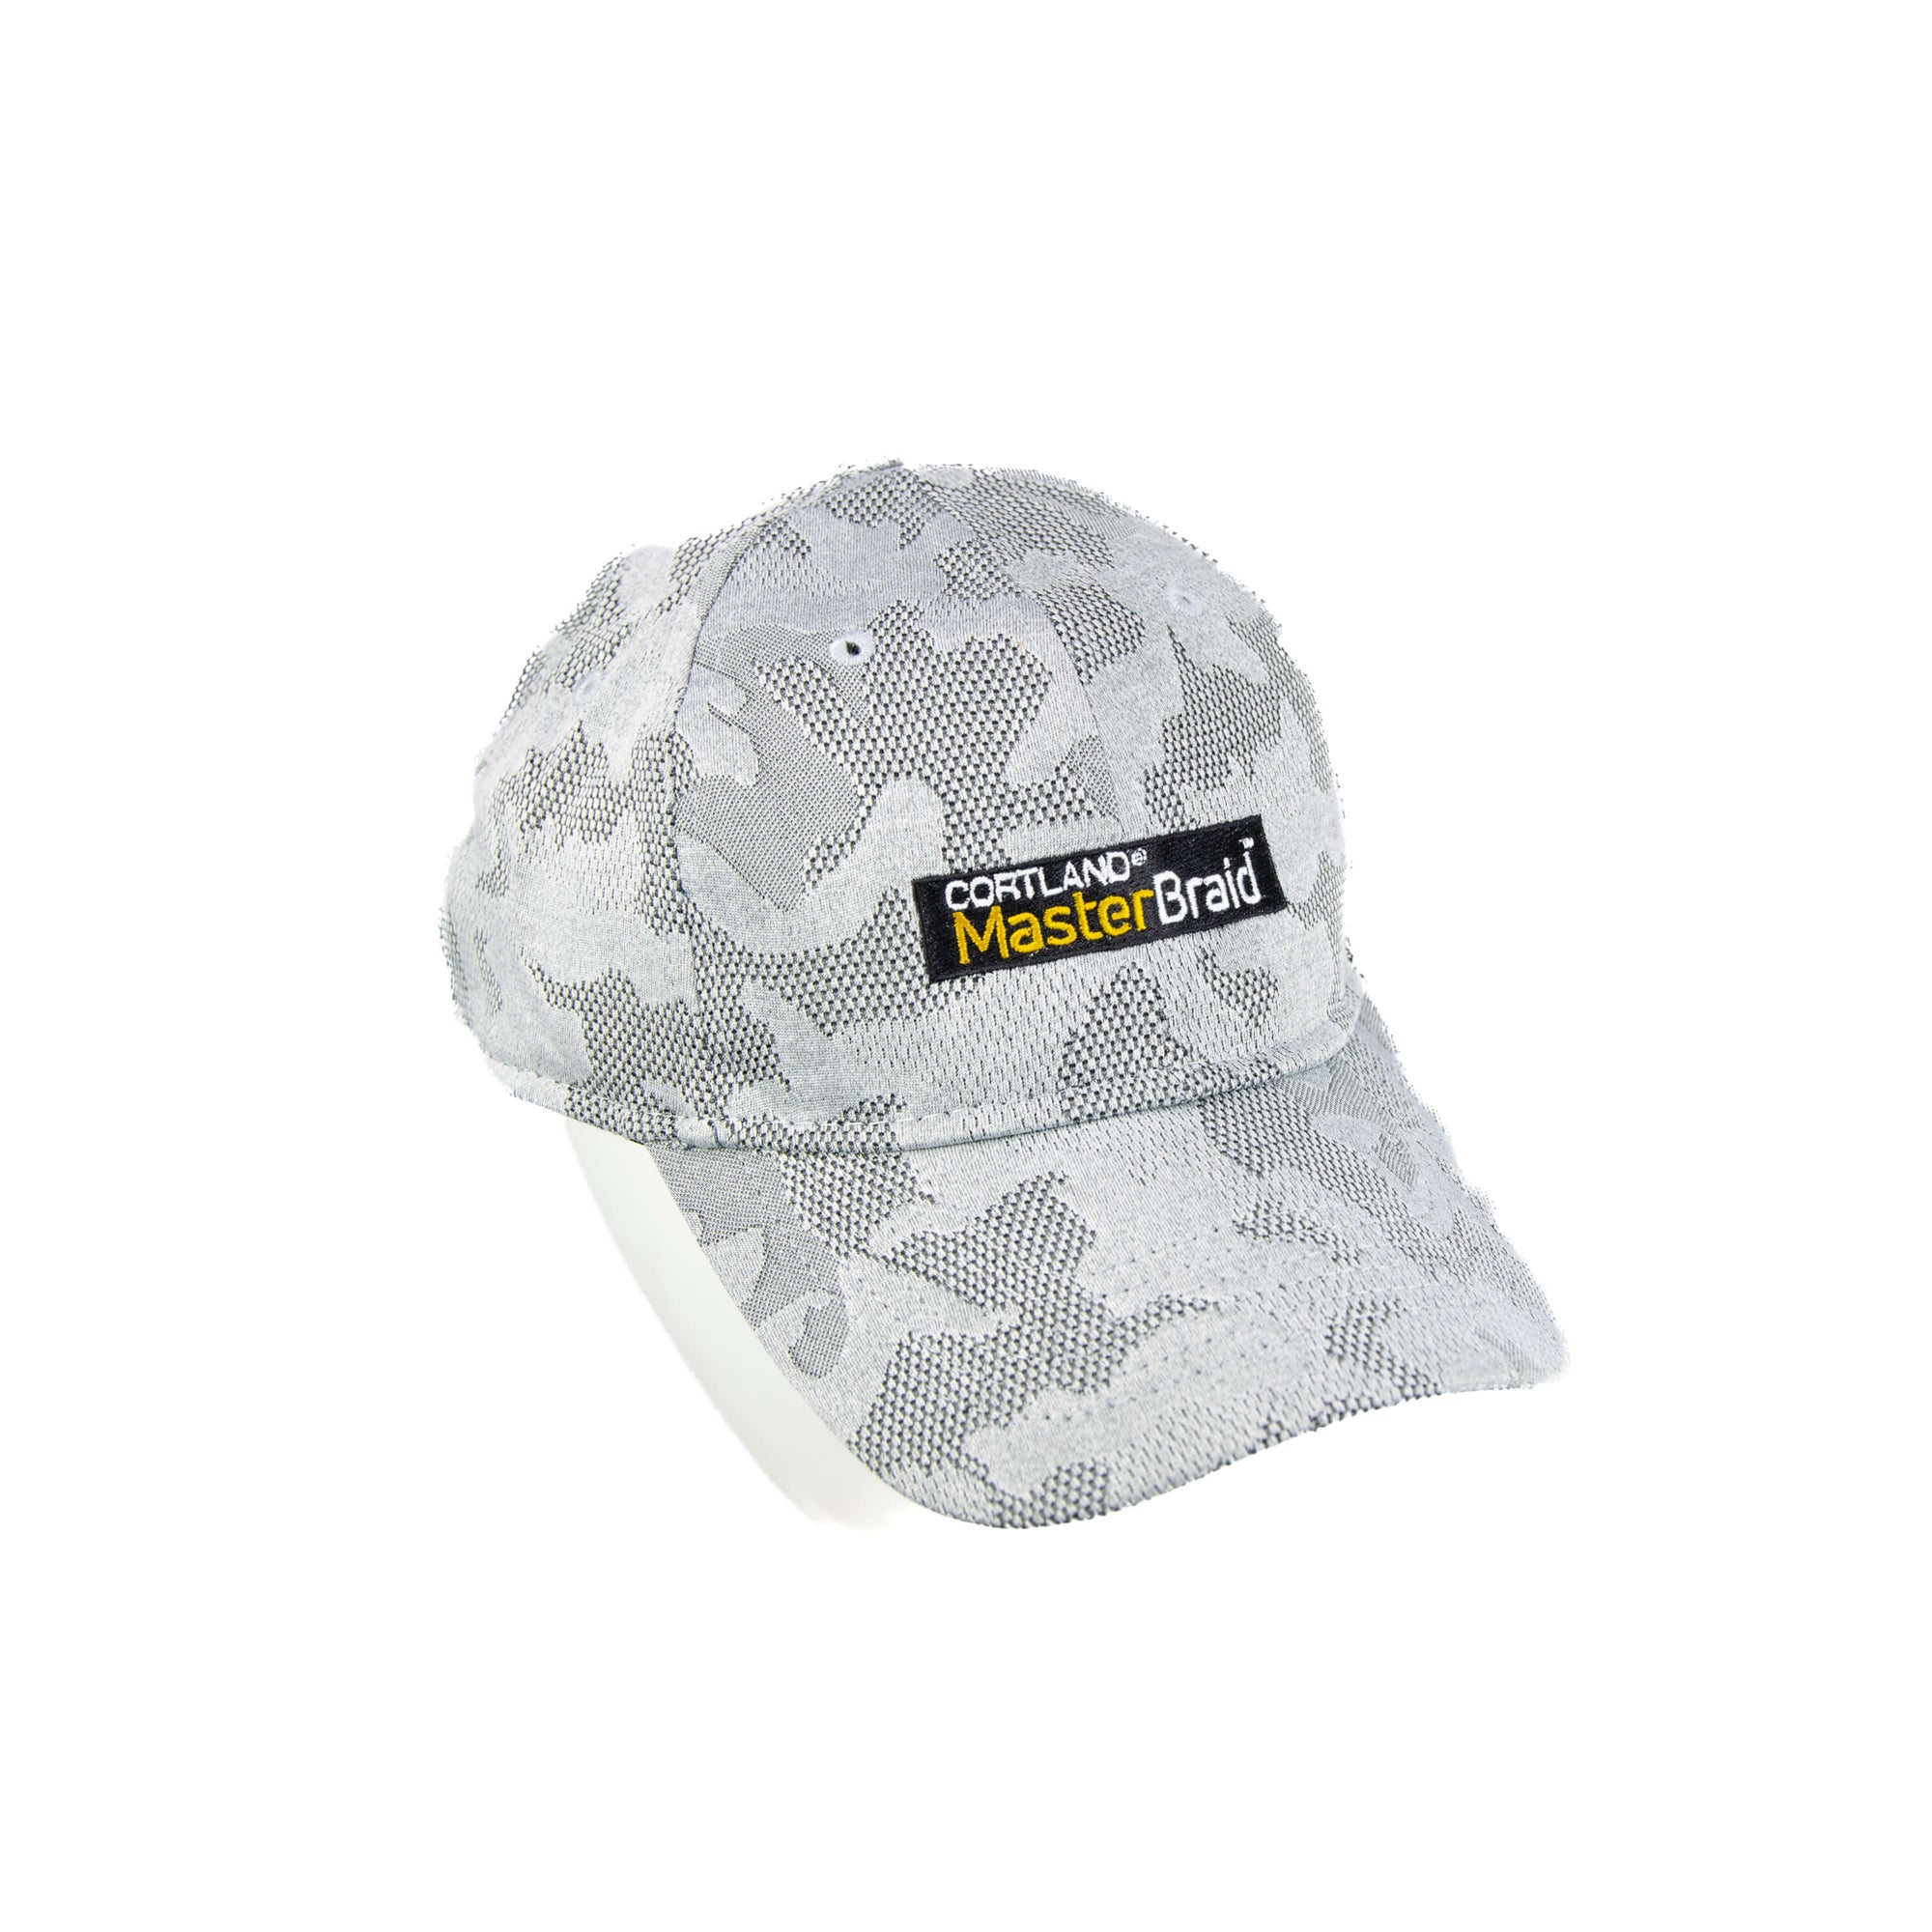 Top View of the Premium Performance Master Braid Cap. The hat is a grey and white camo. The Cortland Master Braid logo is white and yellow, with a black background.